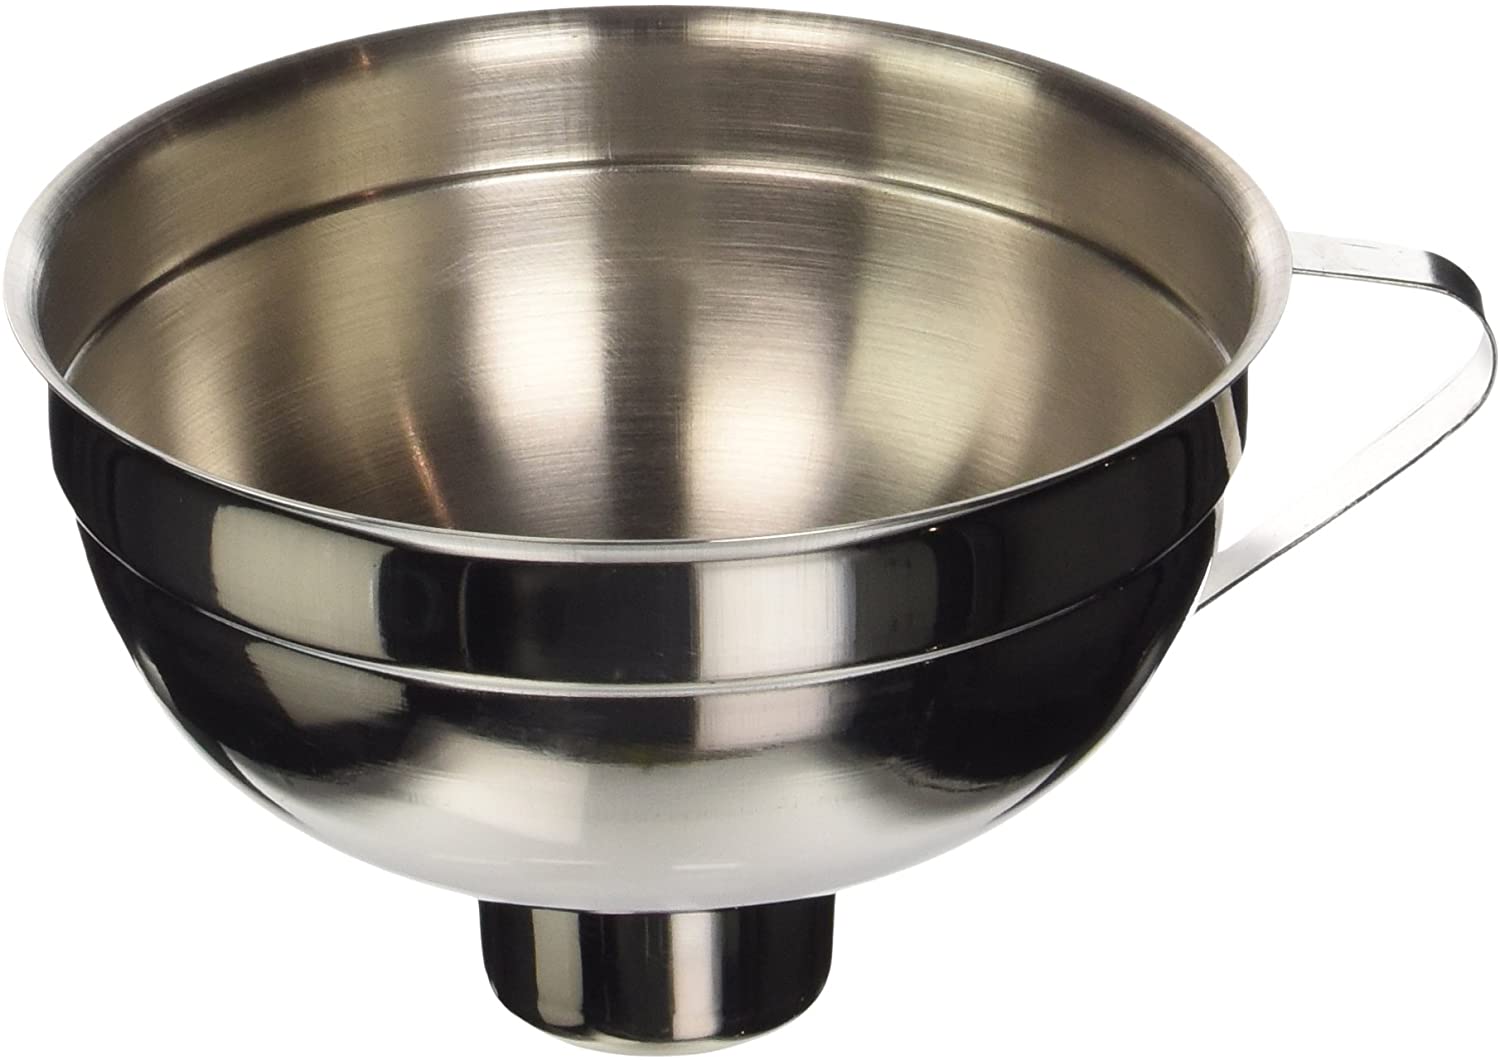 KitchenCraft Home Made Jam Funnel 14 cm Stainless Steel